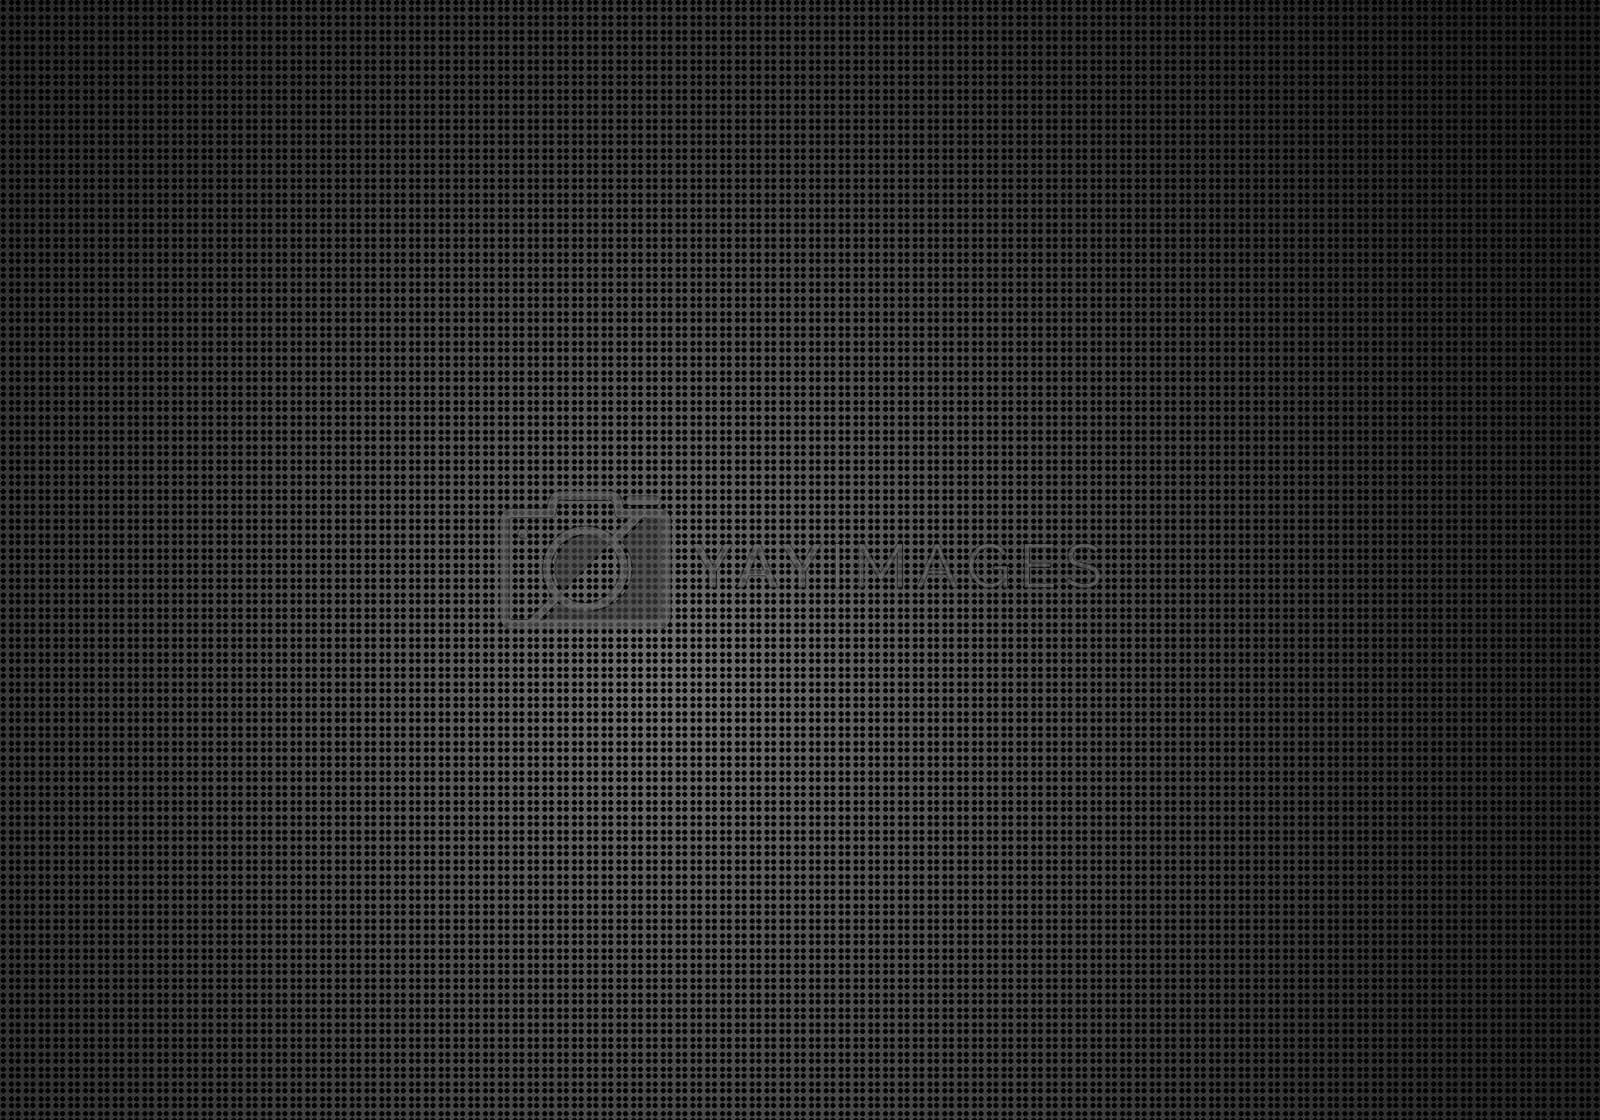 Royalty free image of Pattern Backgrounds. Graphic pattern for fabric, wallpaper, packaging. by TravelSync27